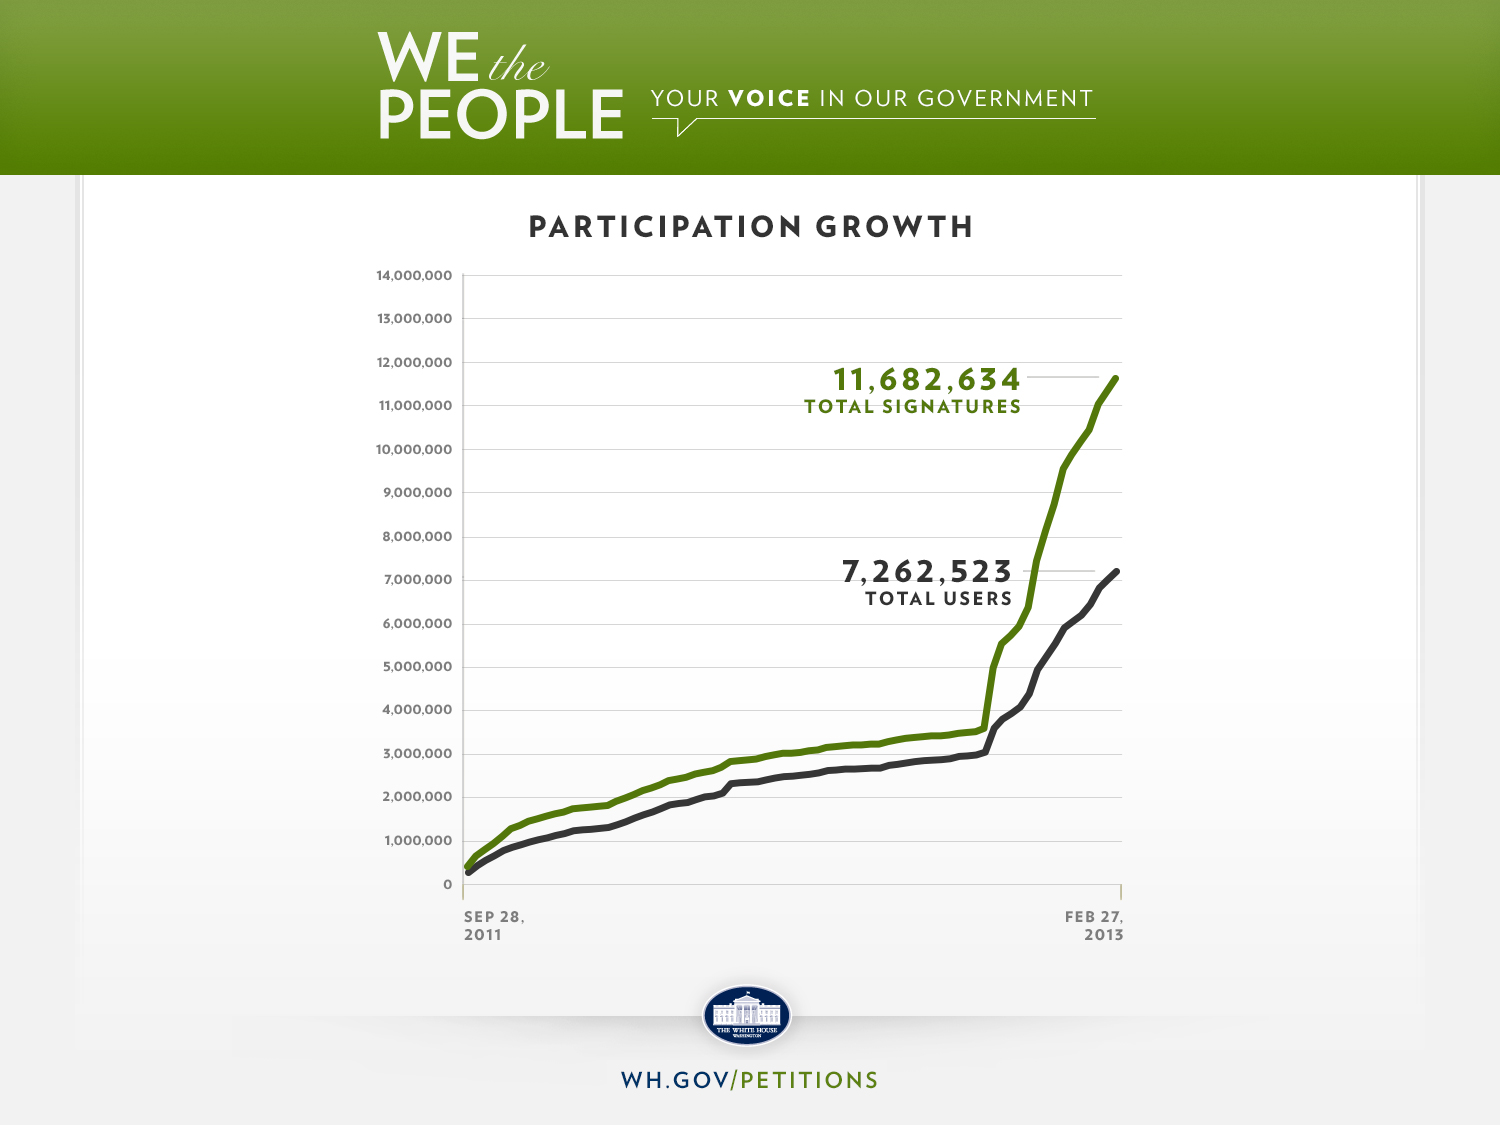 We the People Growth (March 13, 2013) 